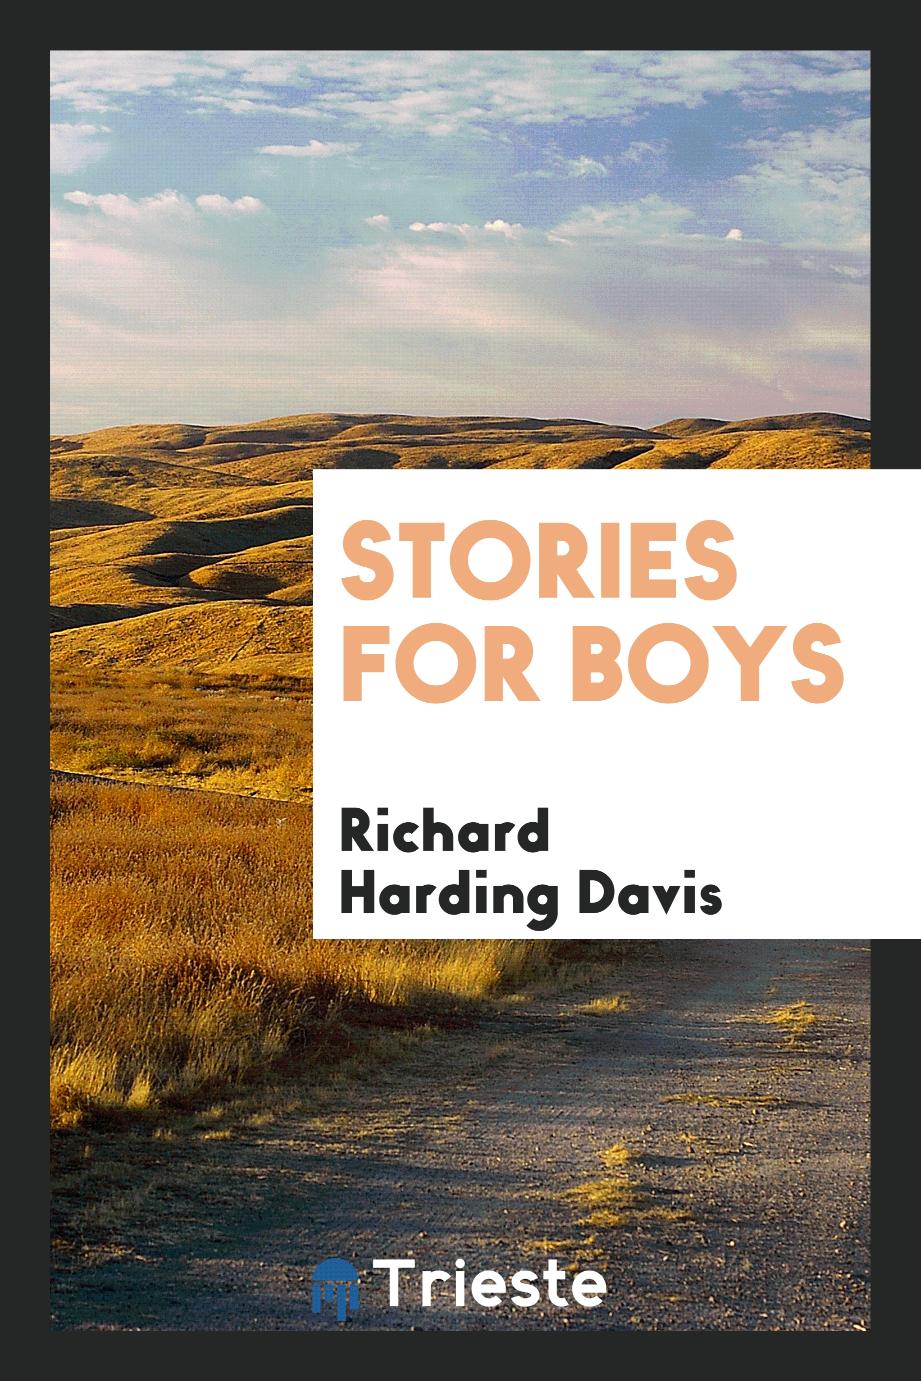 Stories for boys